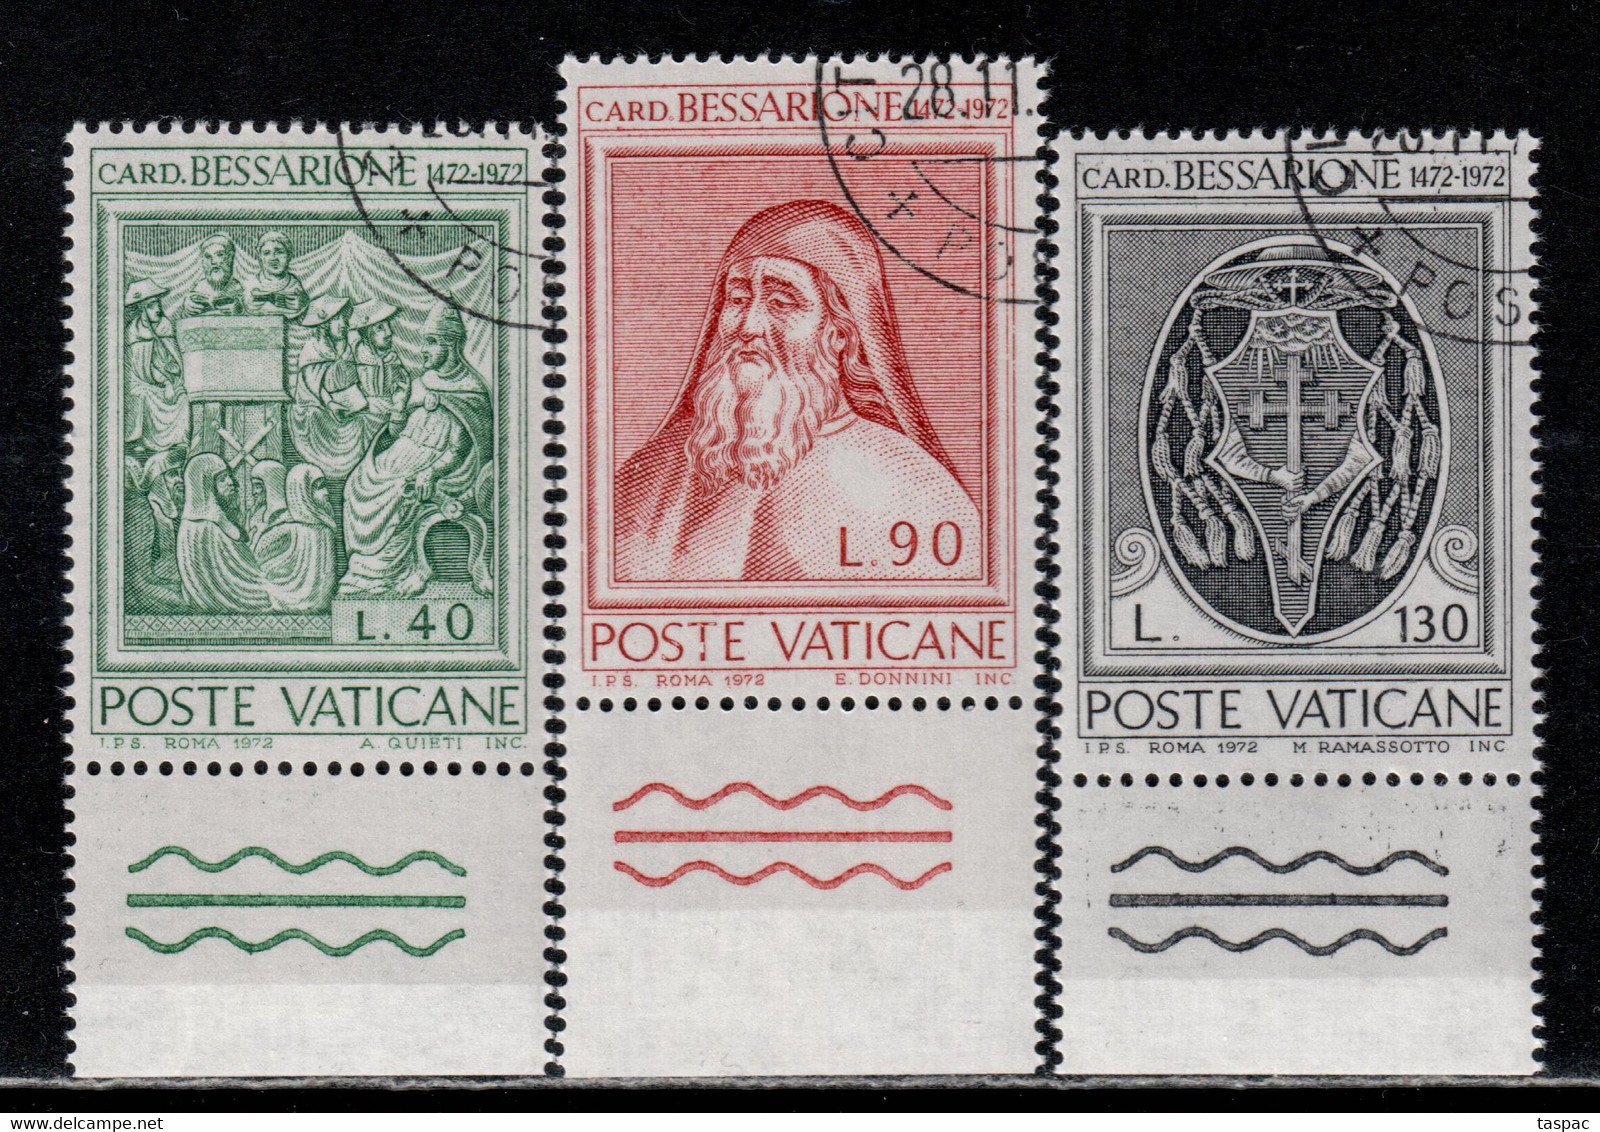 Vatican 1972 Mi# 610-612 Used - Johannes Cardinal Bessarion - Used Stamps